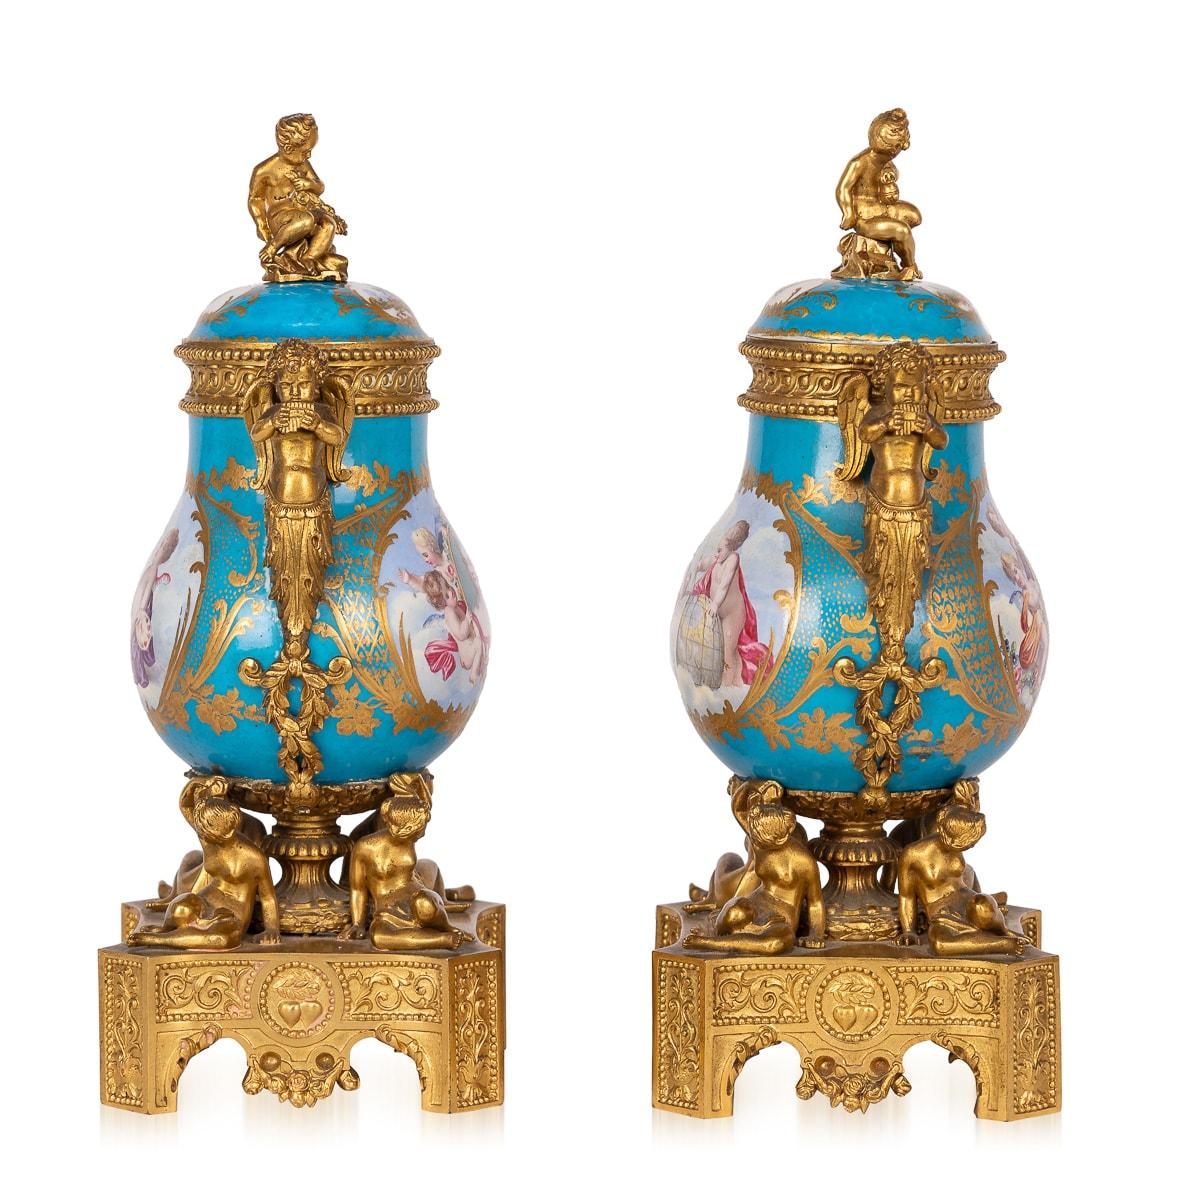 Antique 19th Century Sèvres Style Ormolu Mounted Vases With Cover In Good Condition For Sale In Royal Tunbridge Wells, Kent